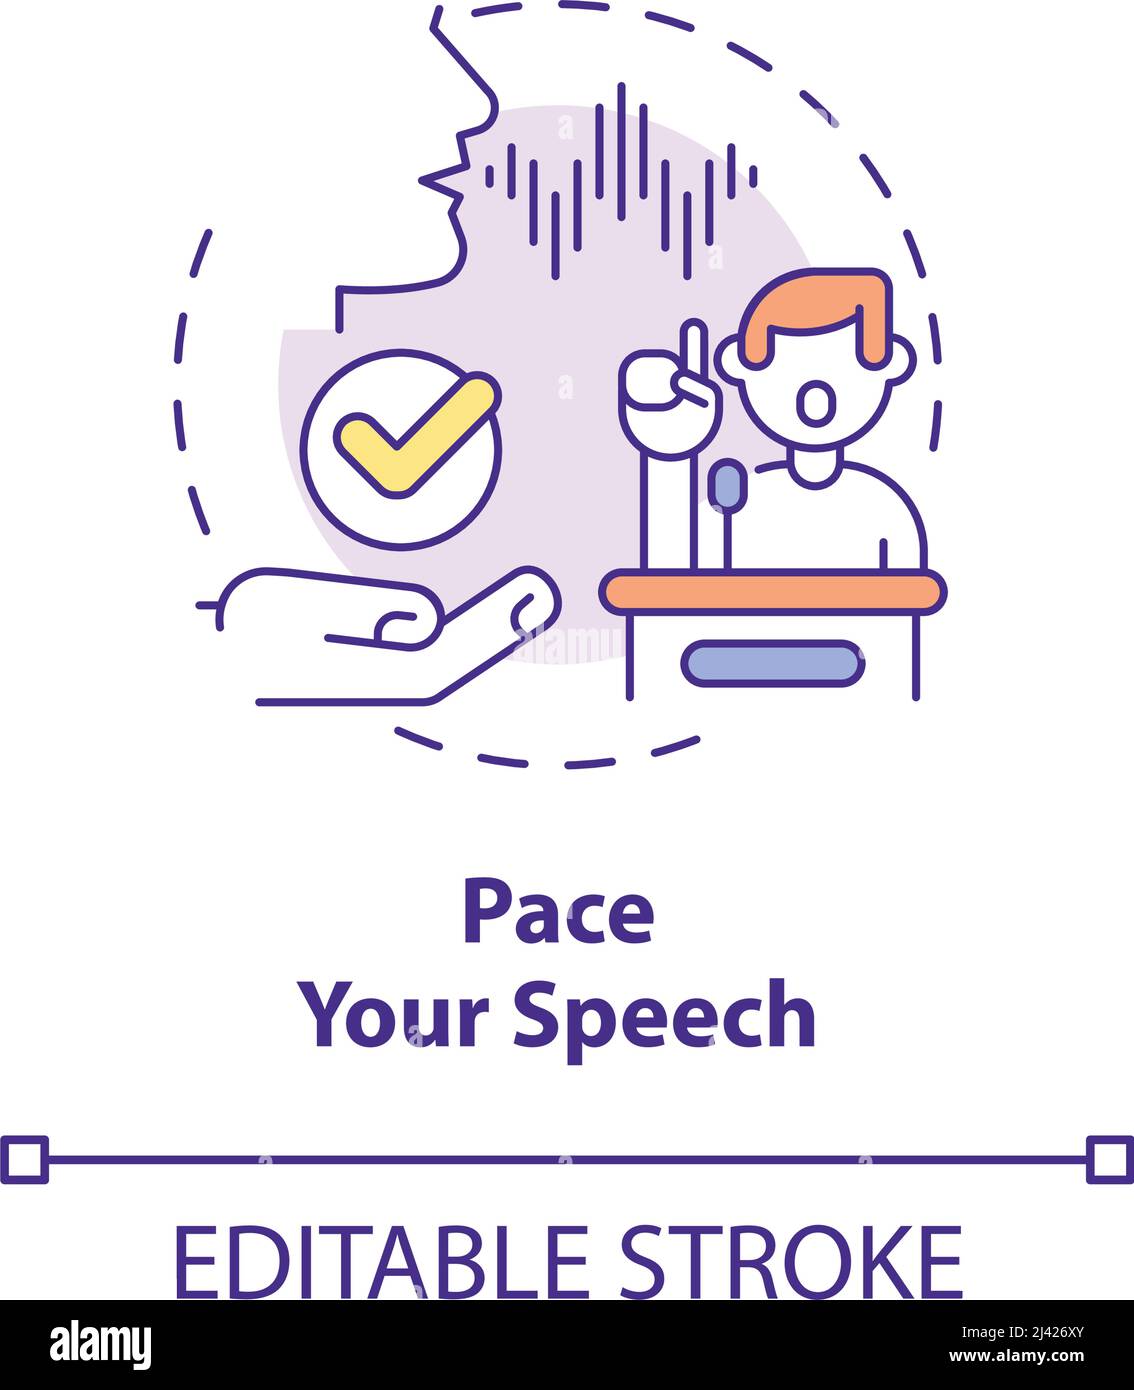 How Do You Pace Your Speech?